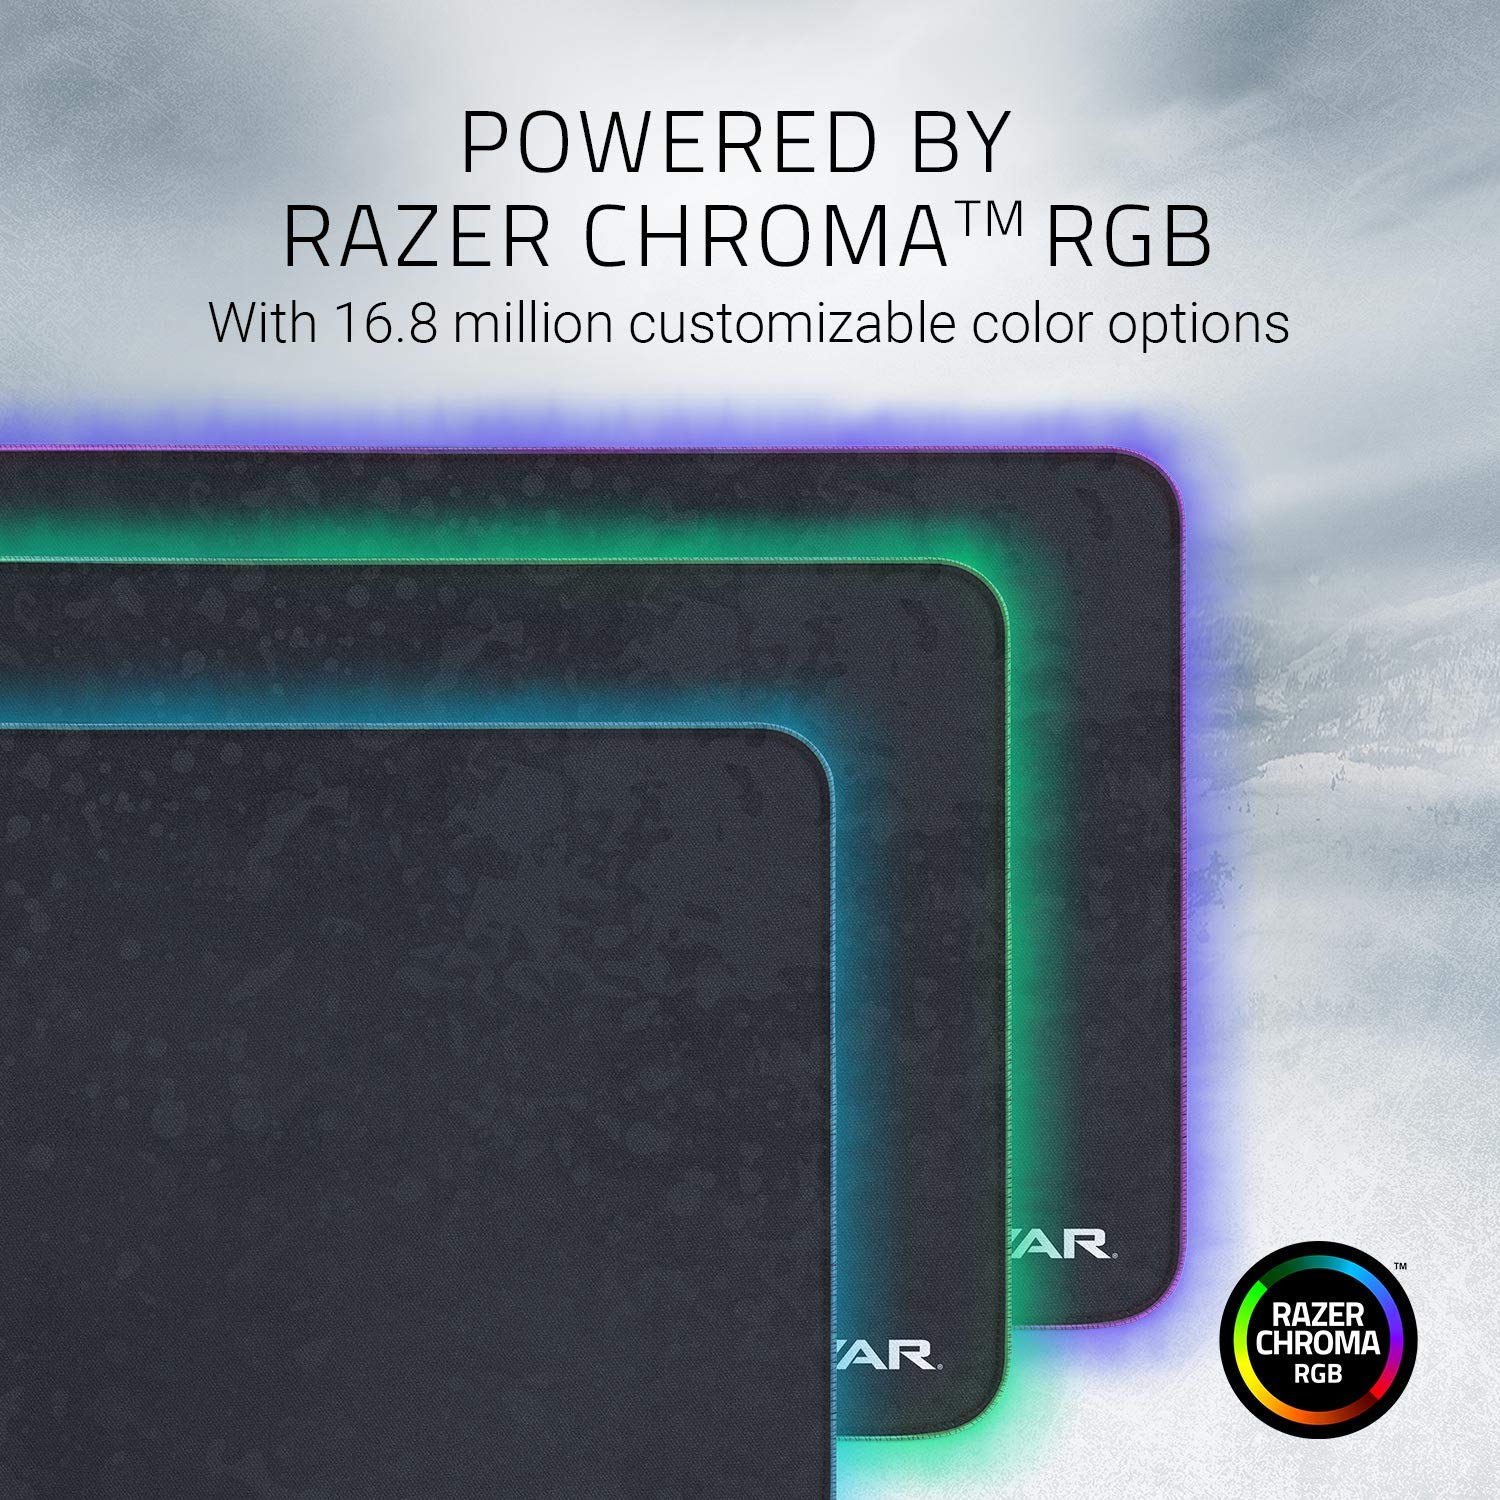 Razer Goliathus Extended Chroma Gaming Mouse Pad: Customizable Chroma RGB Lighting, Soft, Cloth Material, Balanced Control & Speed, Non-Slip Rubber Base, Gears of WAR 5 Edition